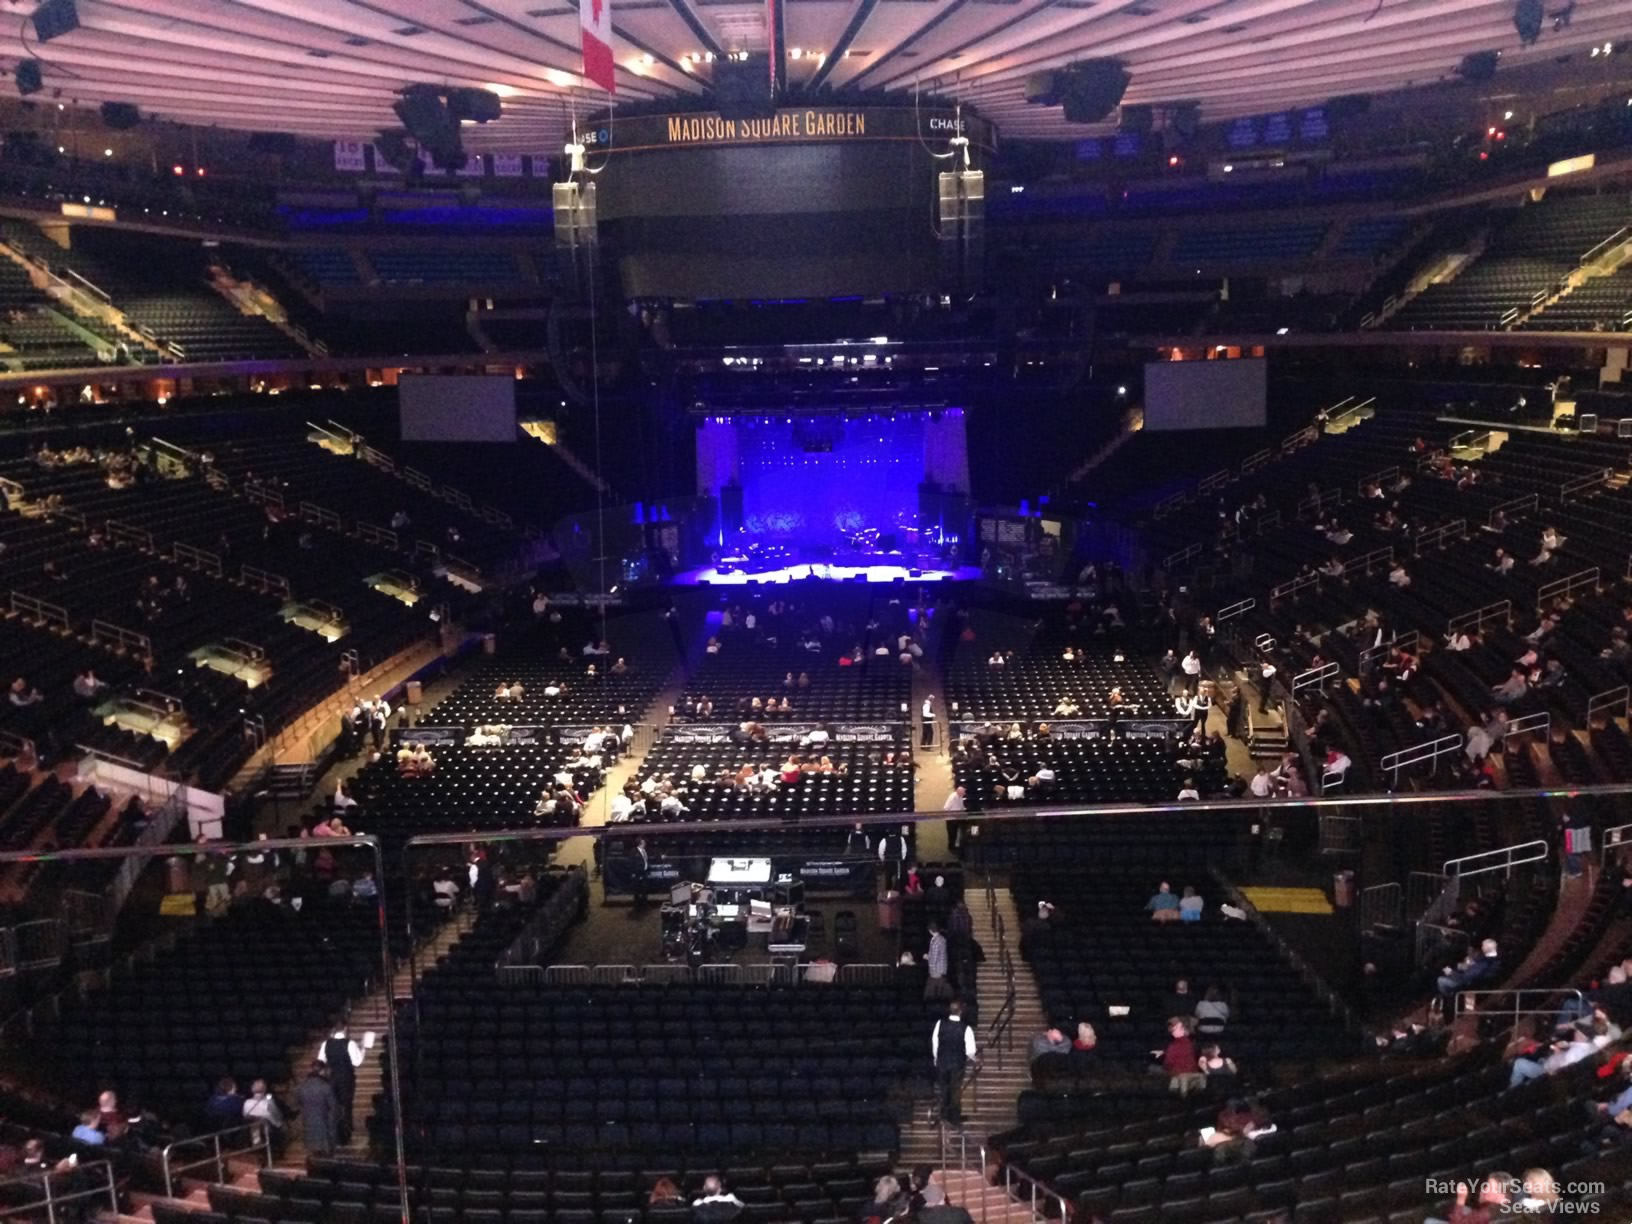 Madison Square Garden Section 204 Concert Seating Rateyourseats Com